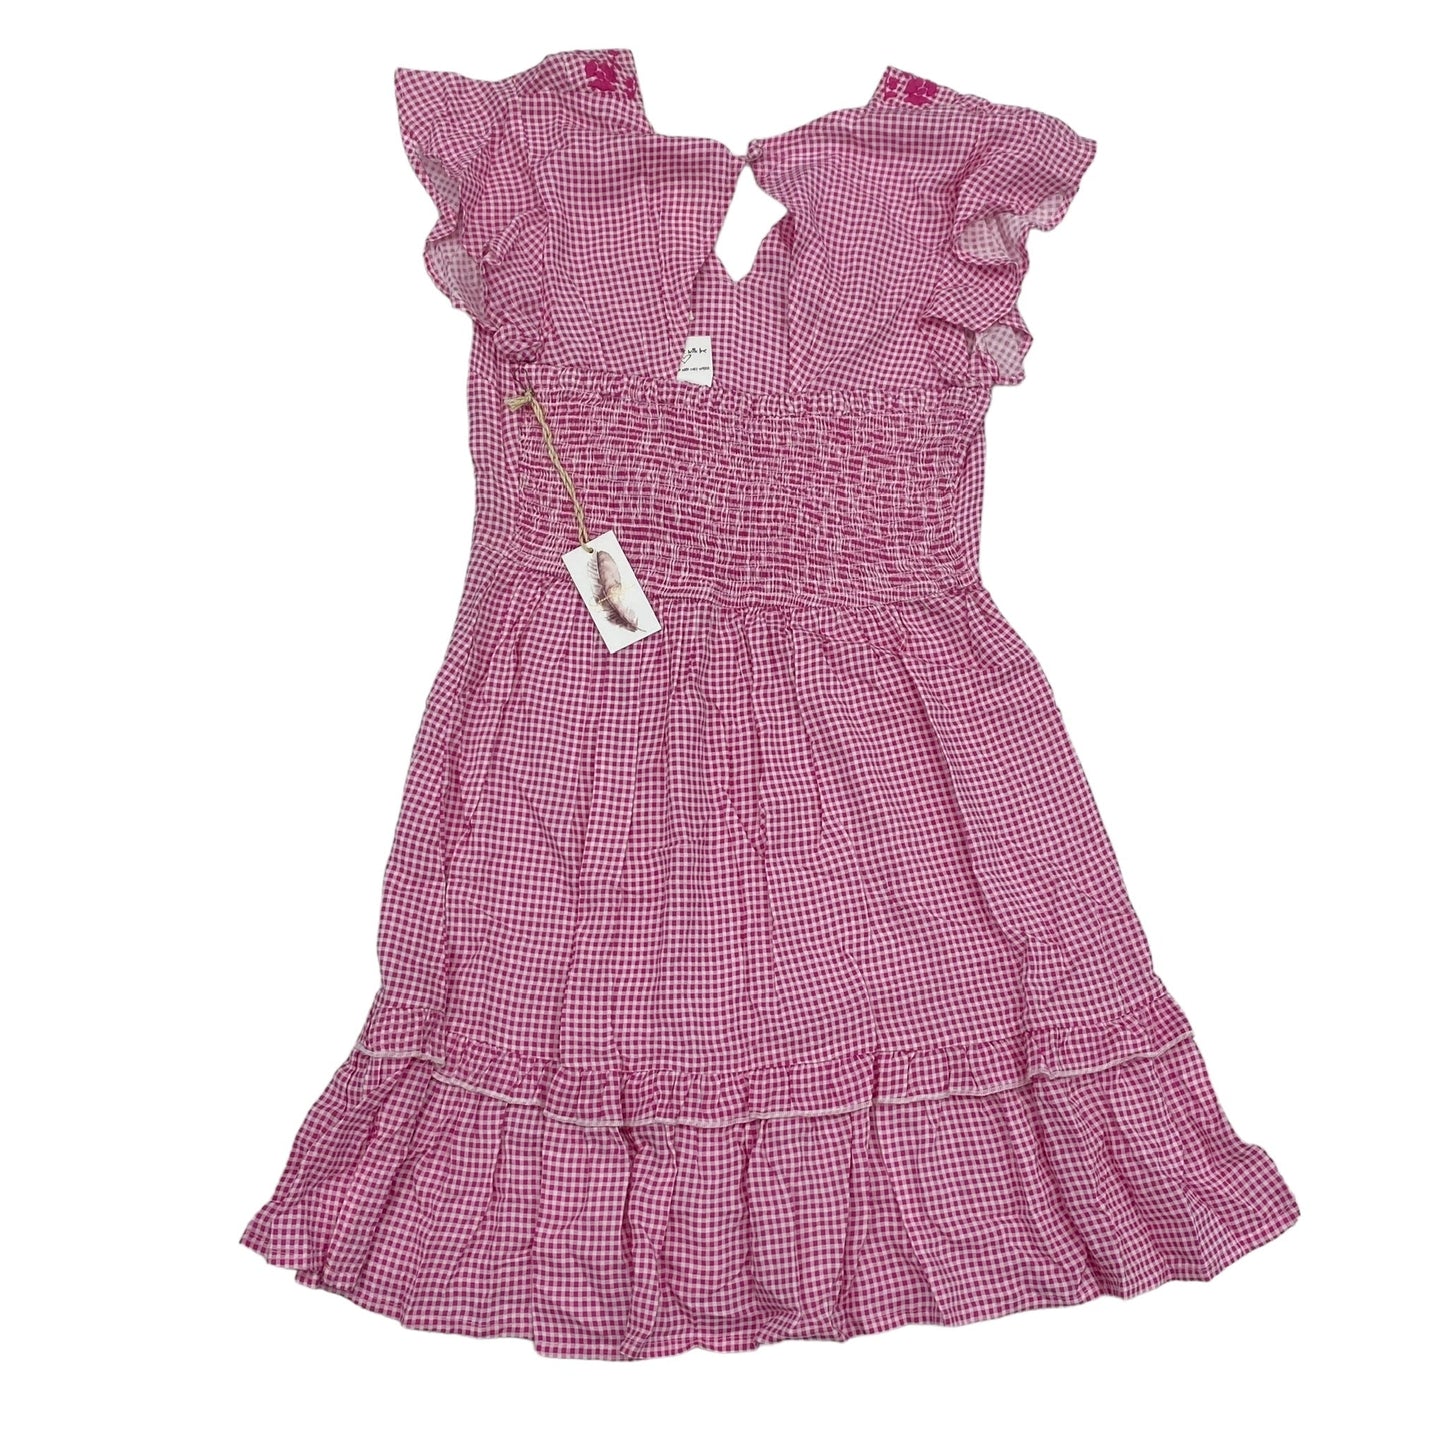 Pink Dress Casual Short Jessica Simpson, Size S